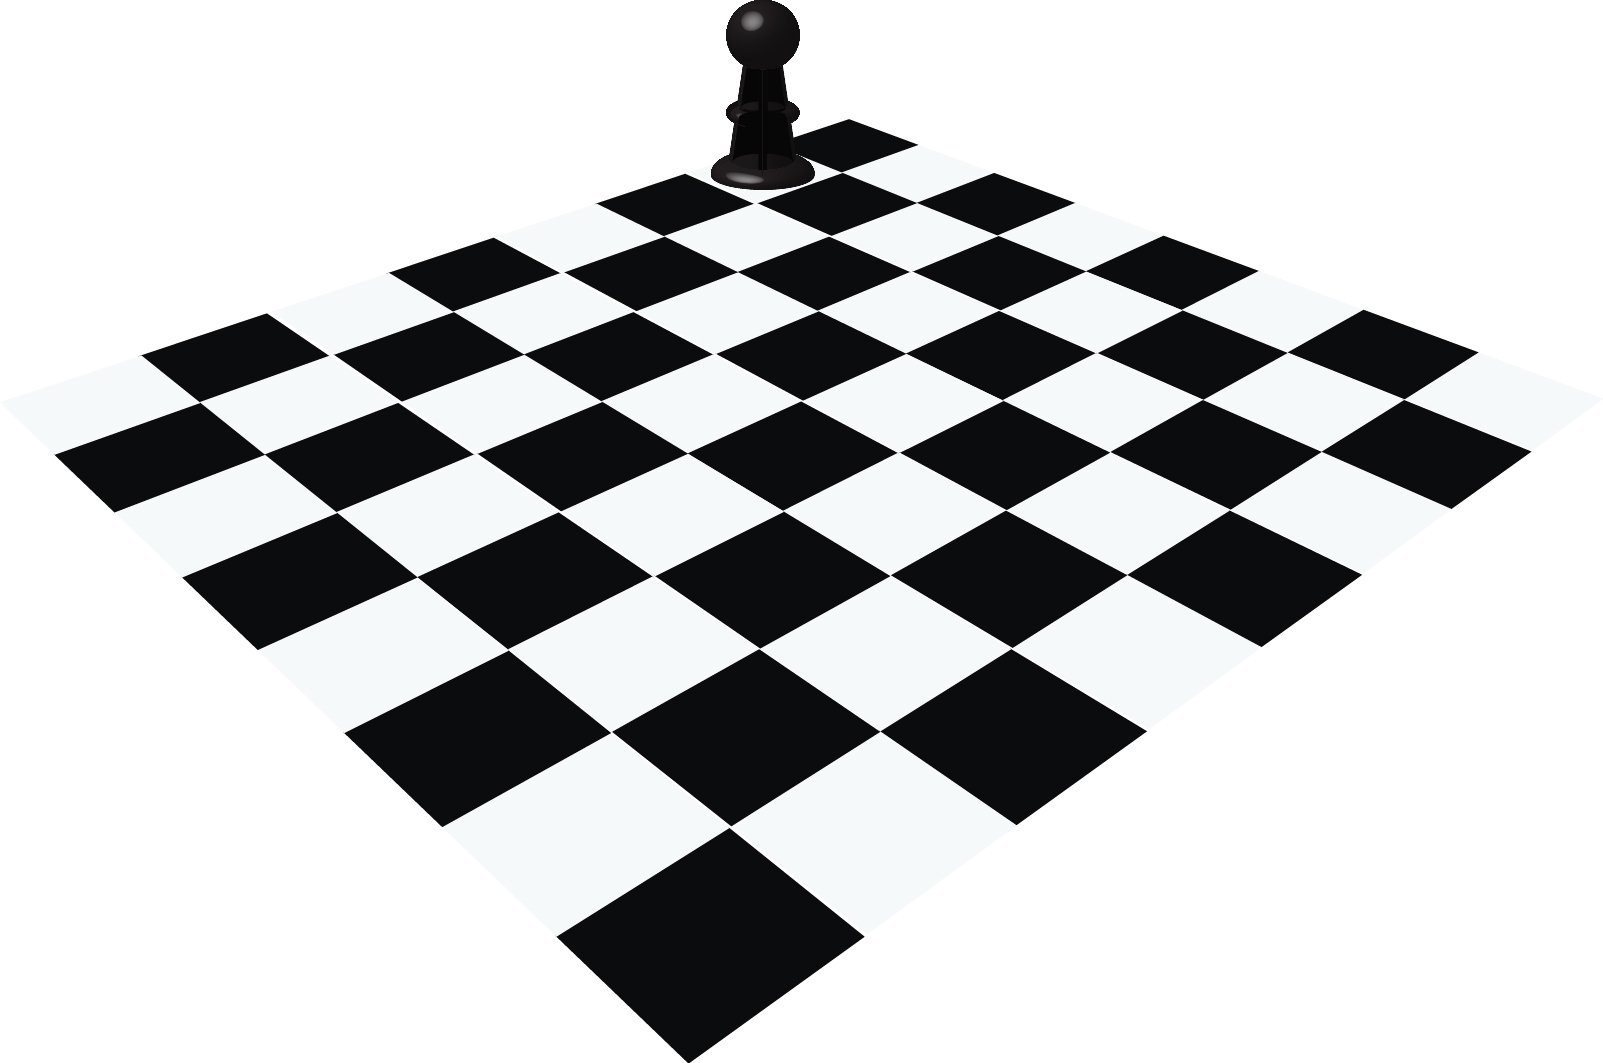 Chessboard. Шахматная доска. If[vfnyjfz LJCRC. Шахматнавя доск. Шахматы доска.